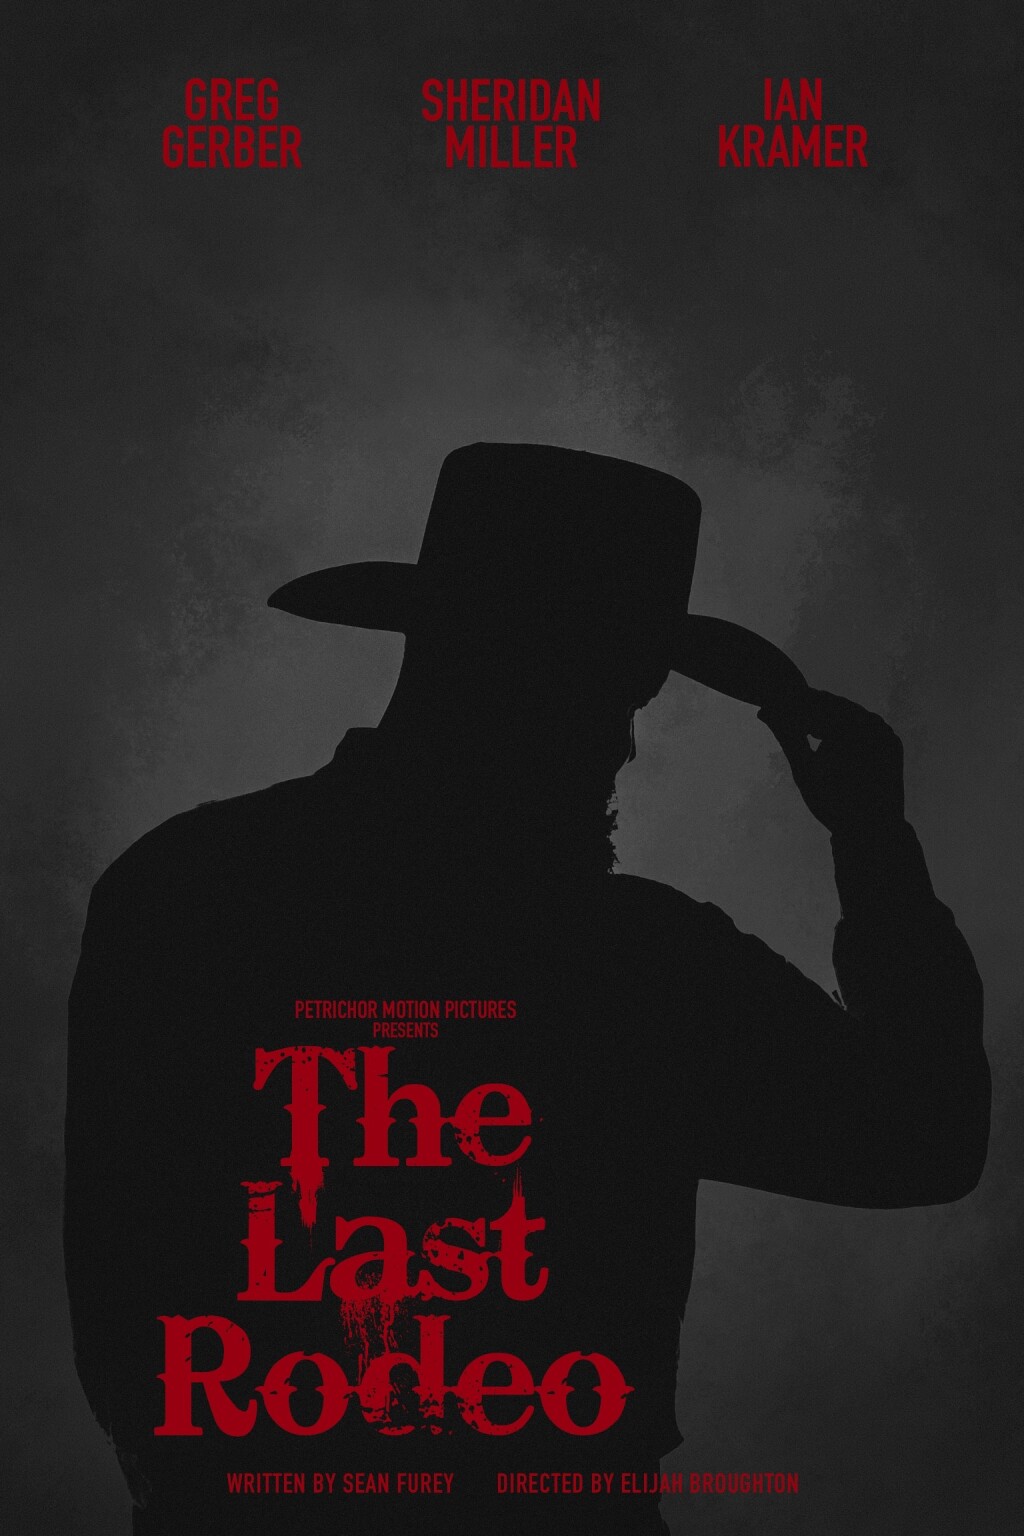 Filmposter for The Last Rodeo